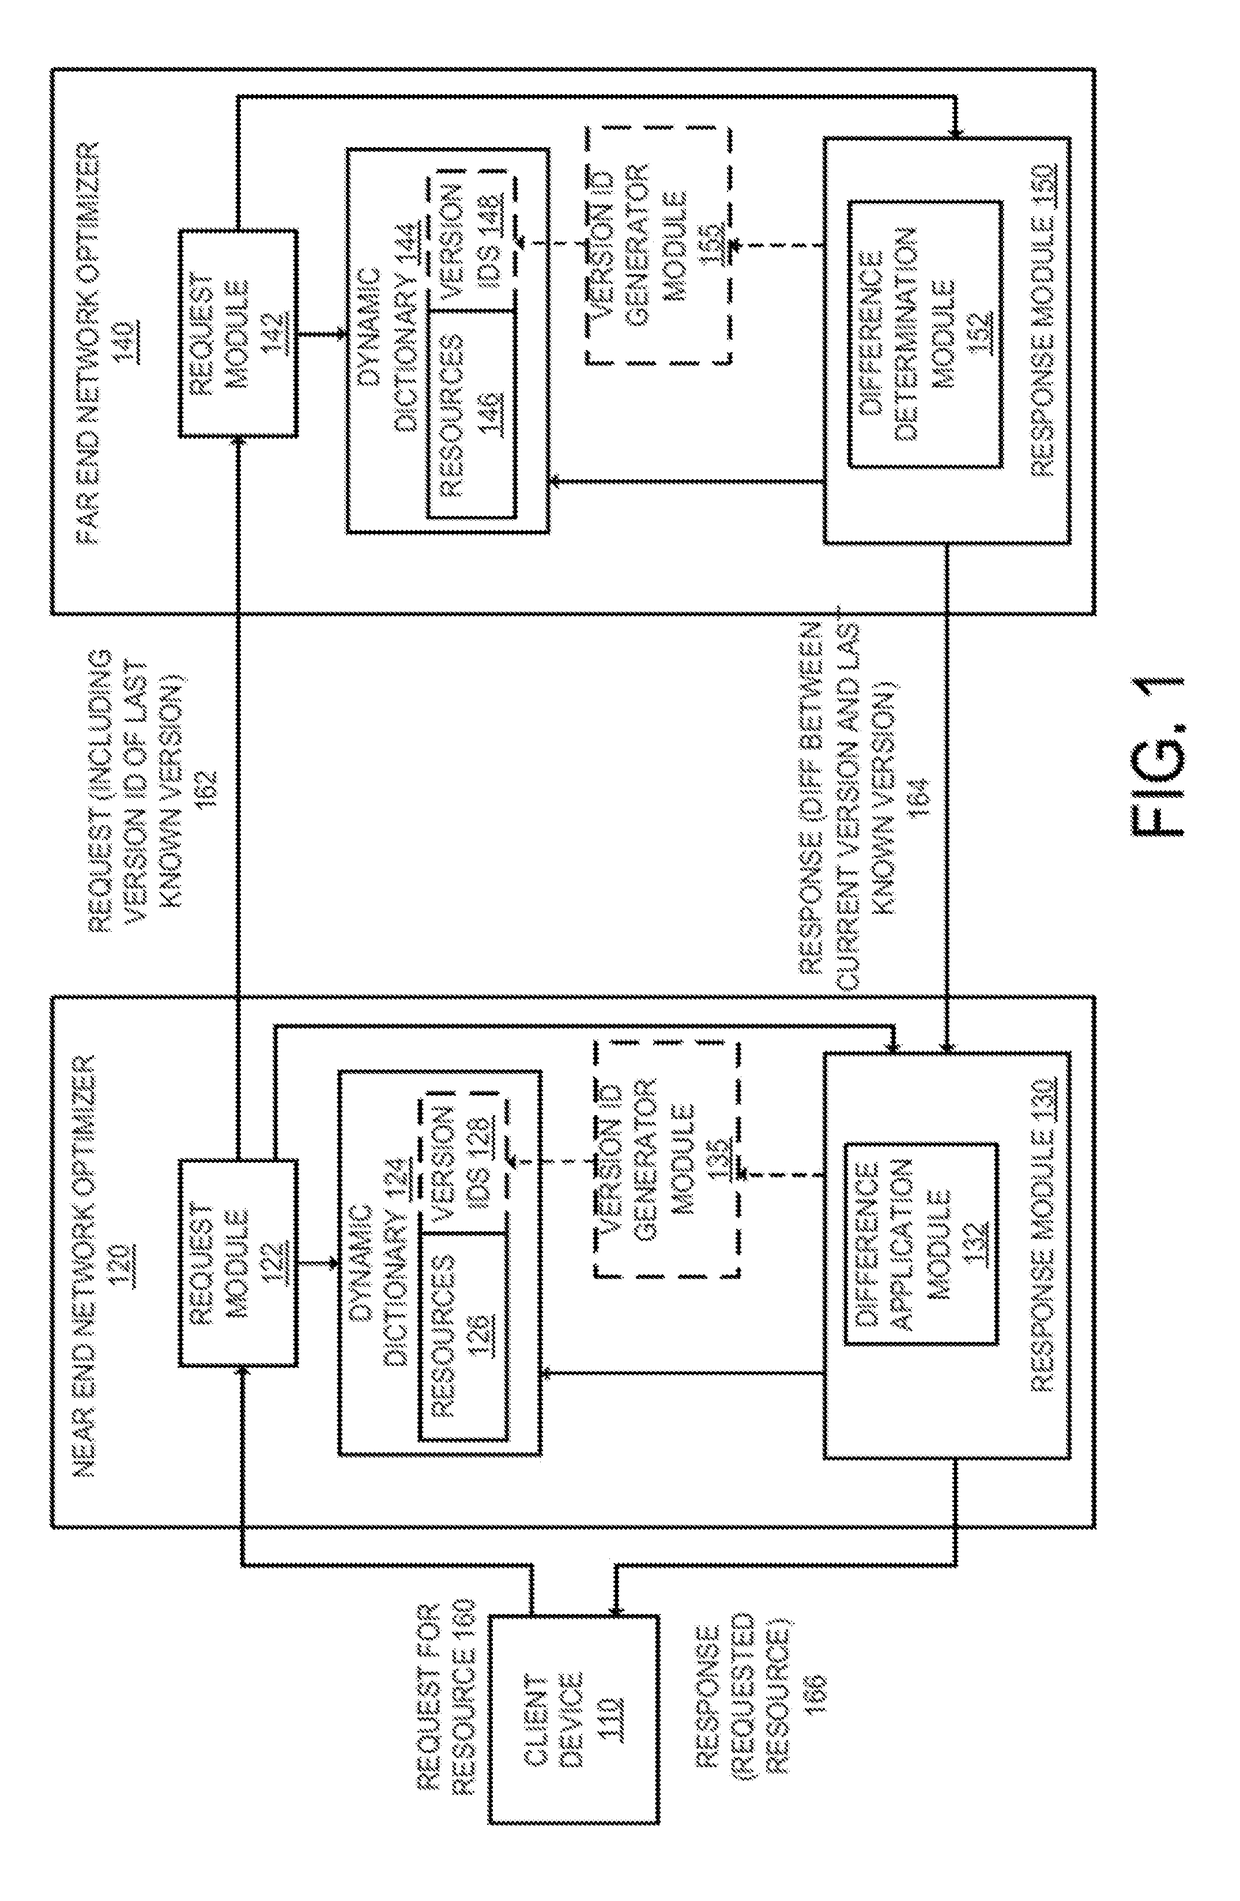 Method and apparatus for reducing network resource transmission size using delta compression